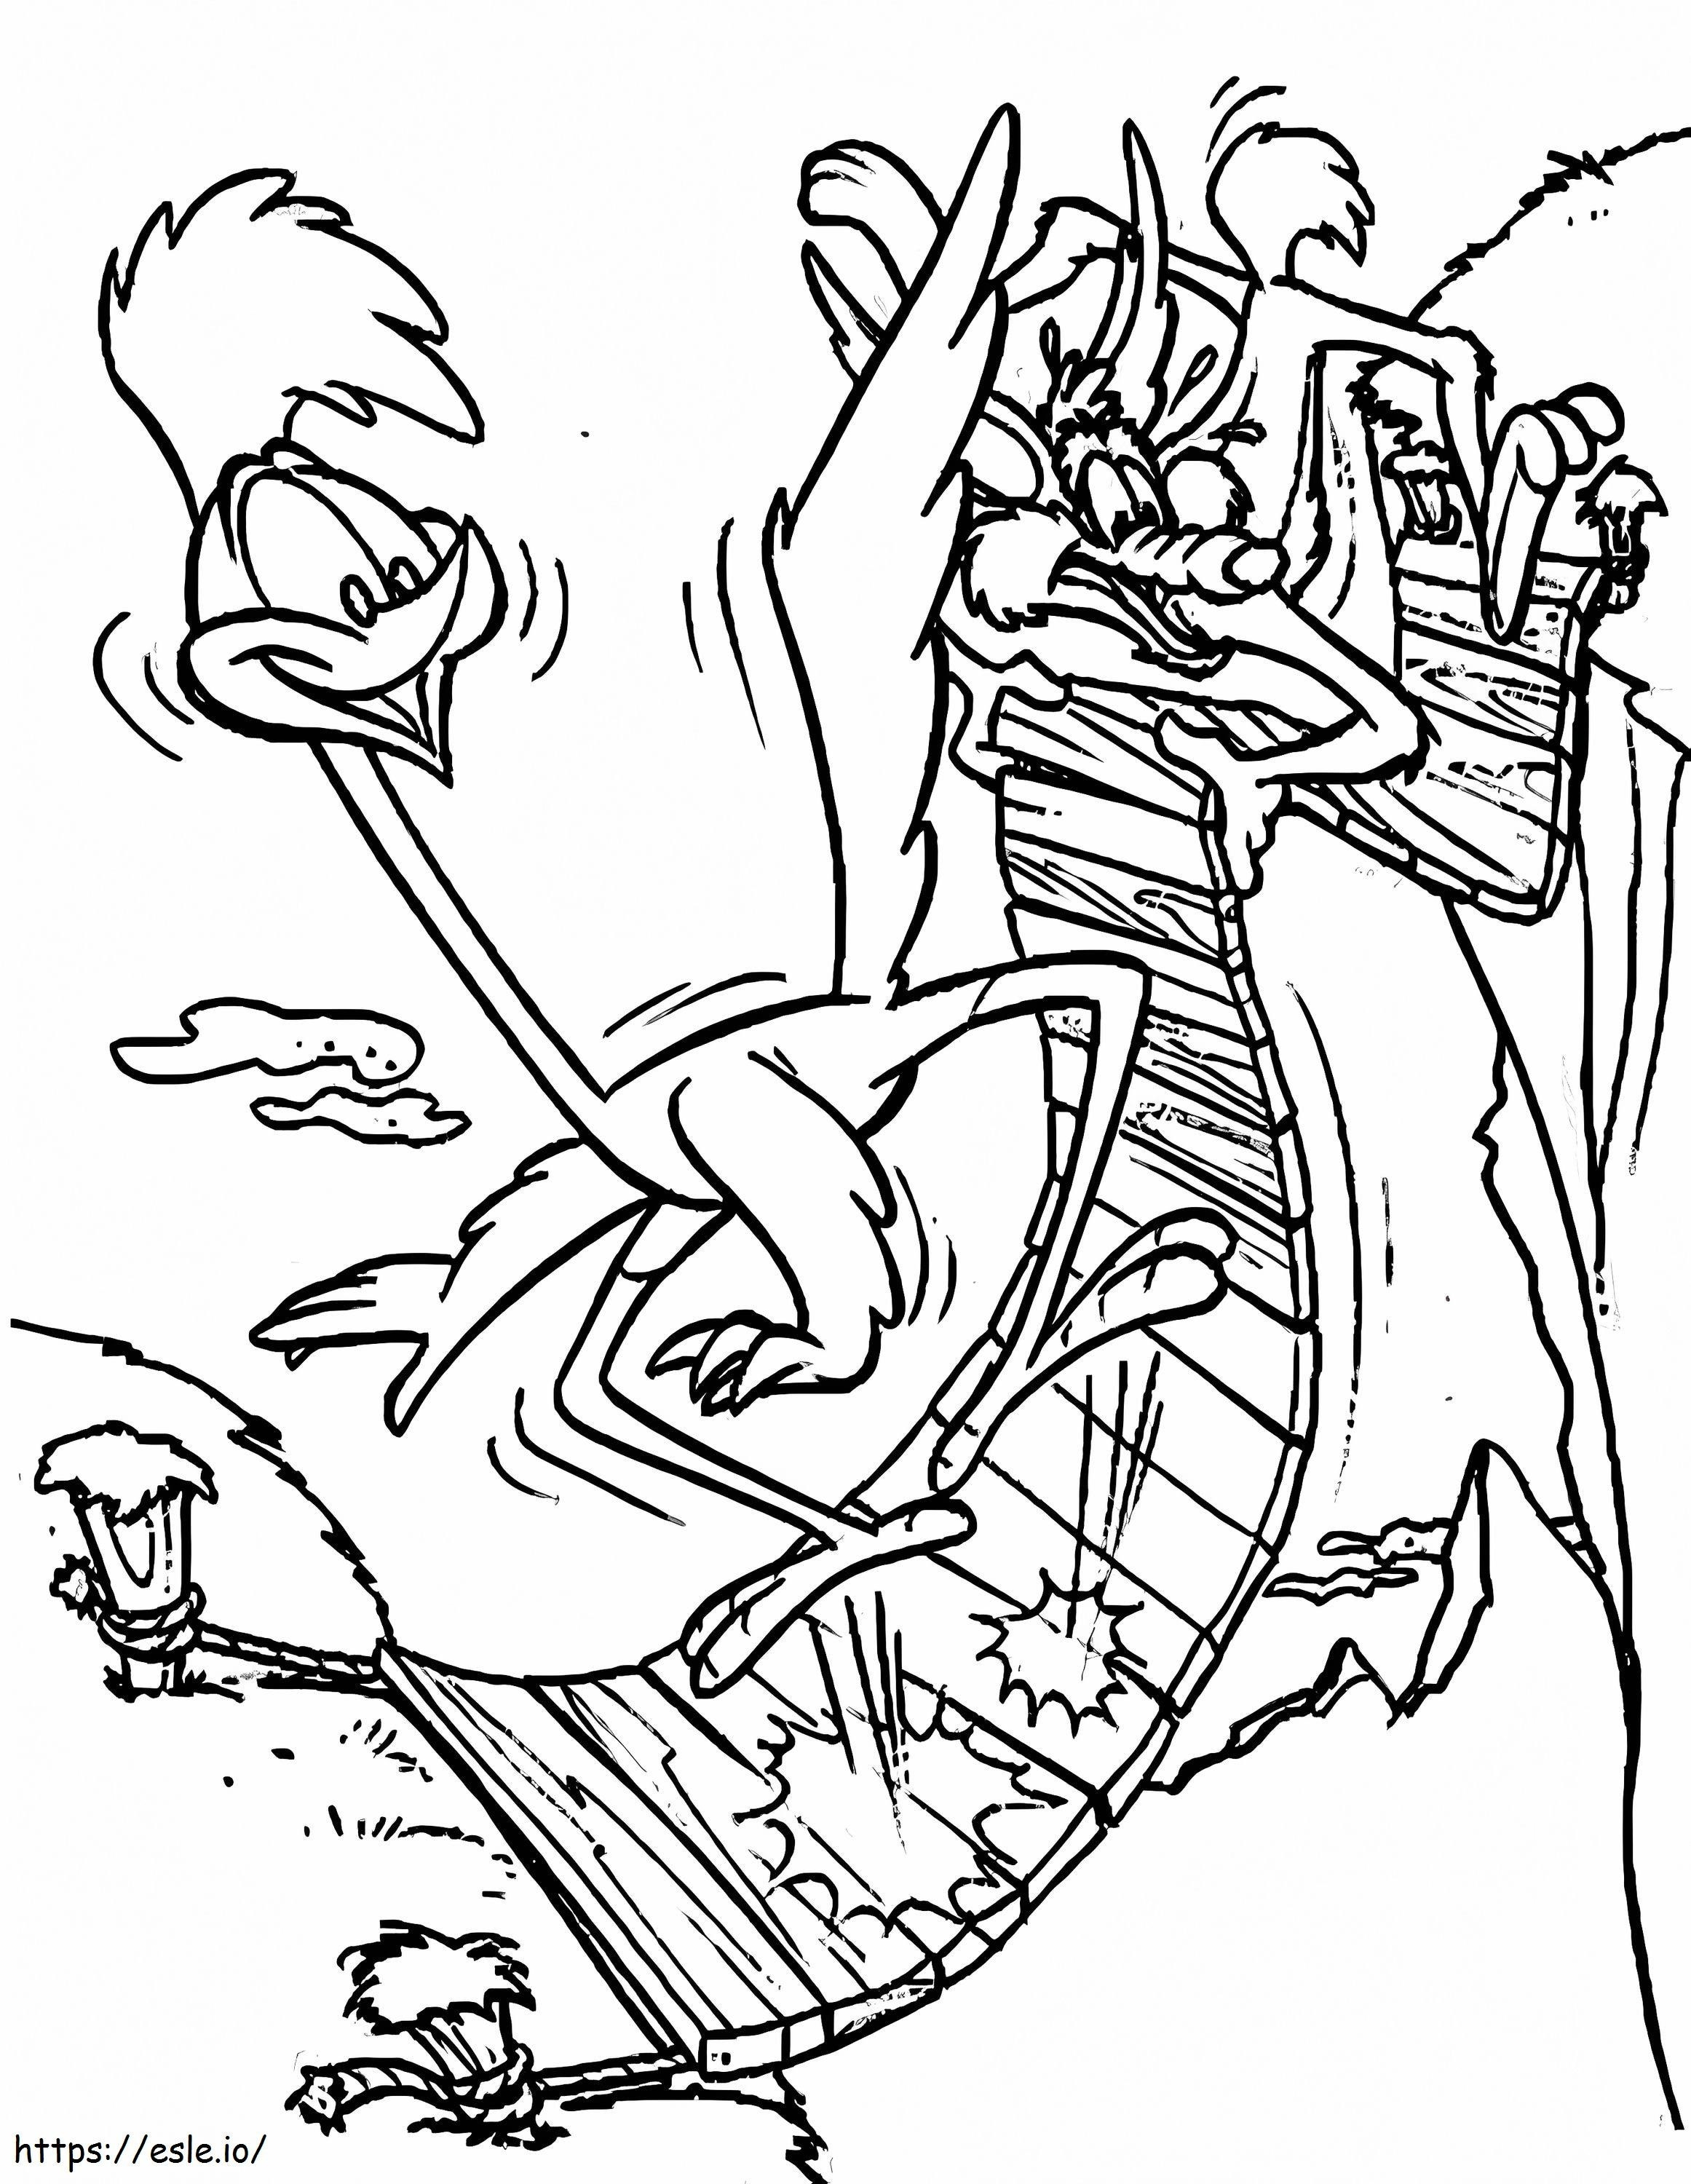 Road Runner Y Wile E. Coyote coloring page